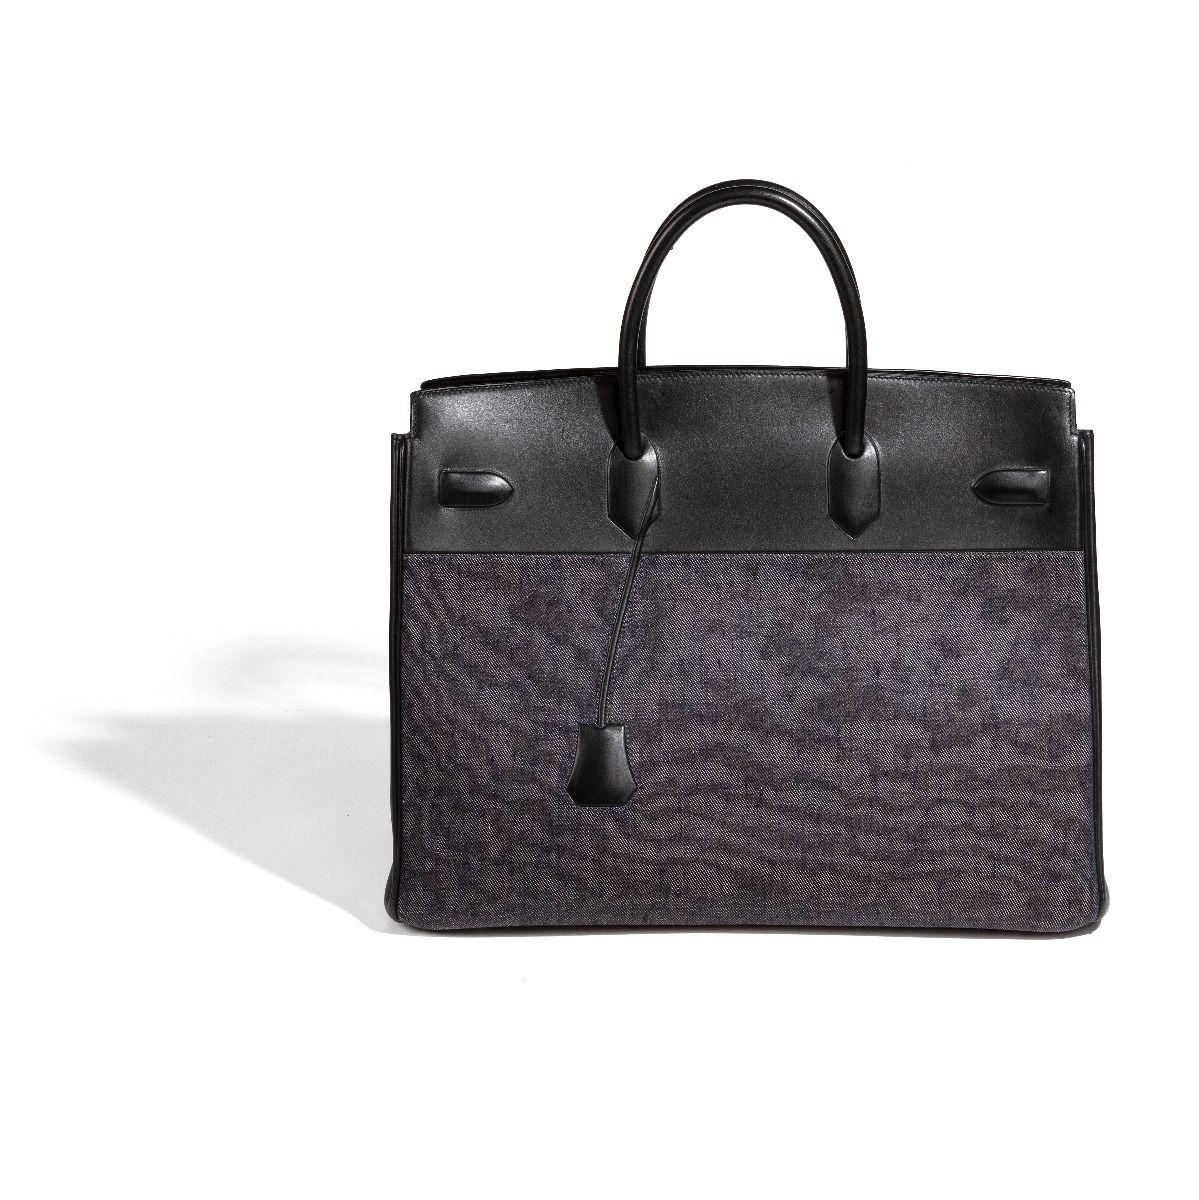 Designed by Jean Paul Gaultier, this Limited Edition Hermès Birkin Shadow Bag is extremely rare. Designed with playful style, the bag features embossed silhouette leather in lieu of straps and a clochette. Crafted from Evercalf Leather at the top